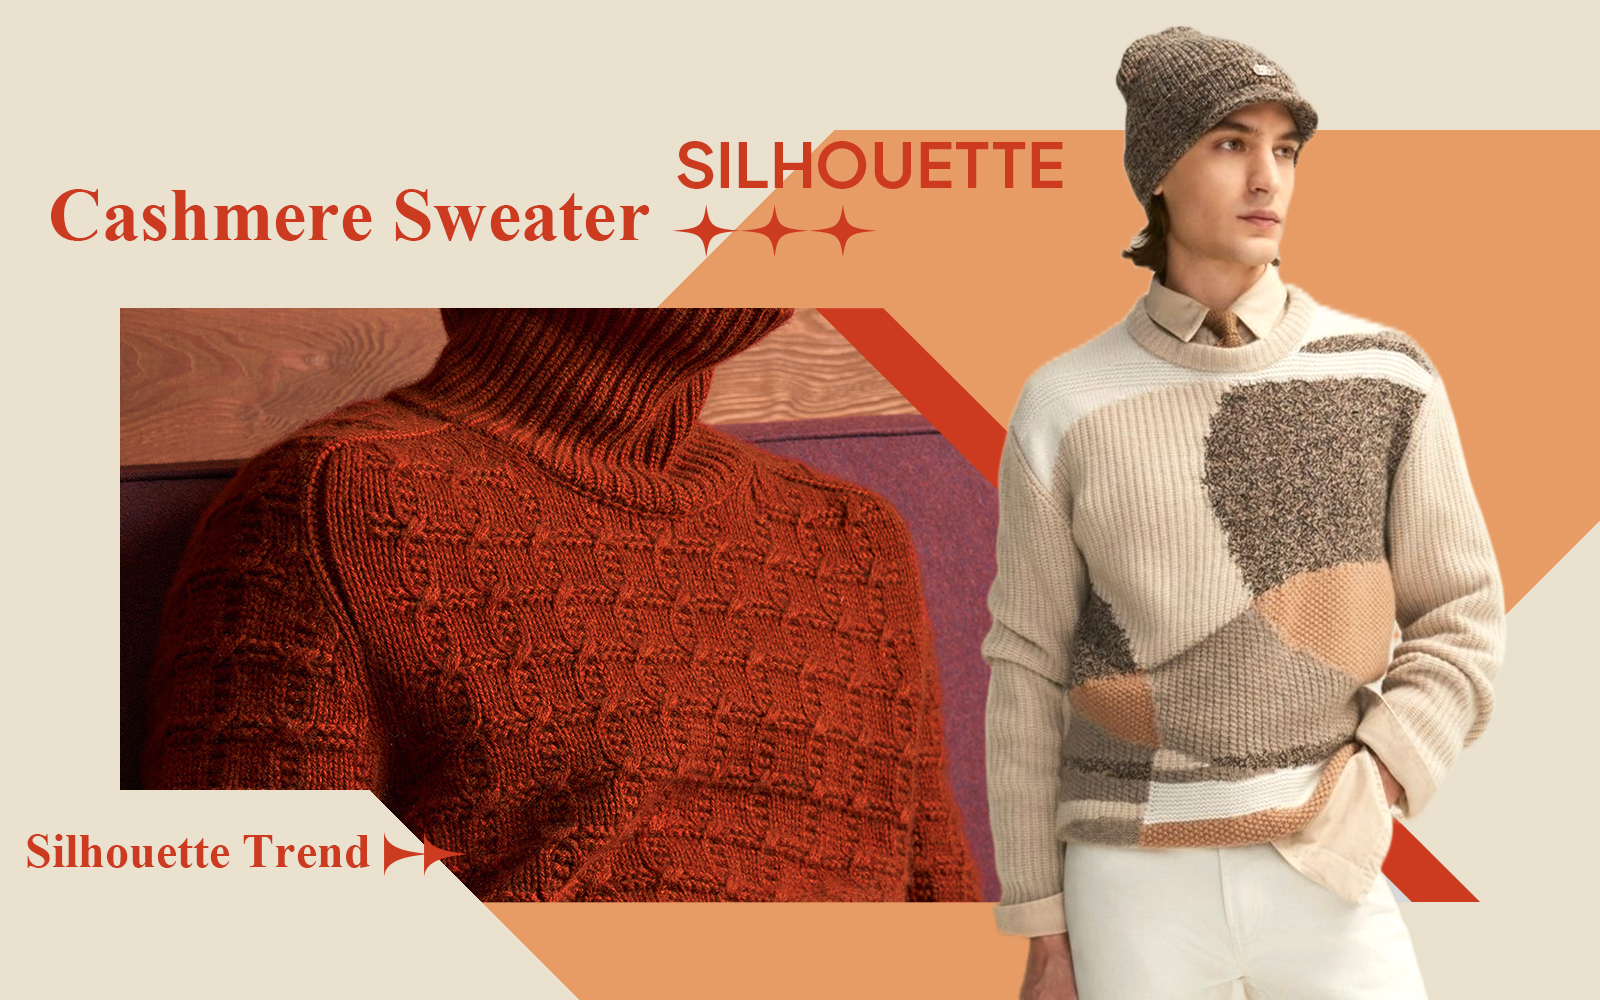 Cashmere Sweater -- The Silhouette Trend for Men's Knitwear